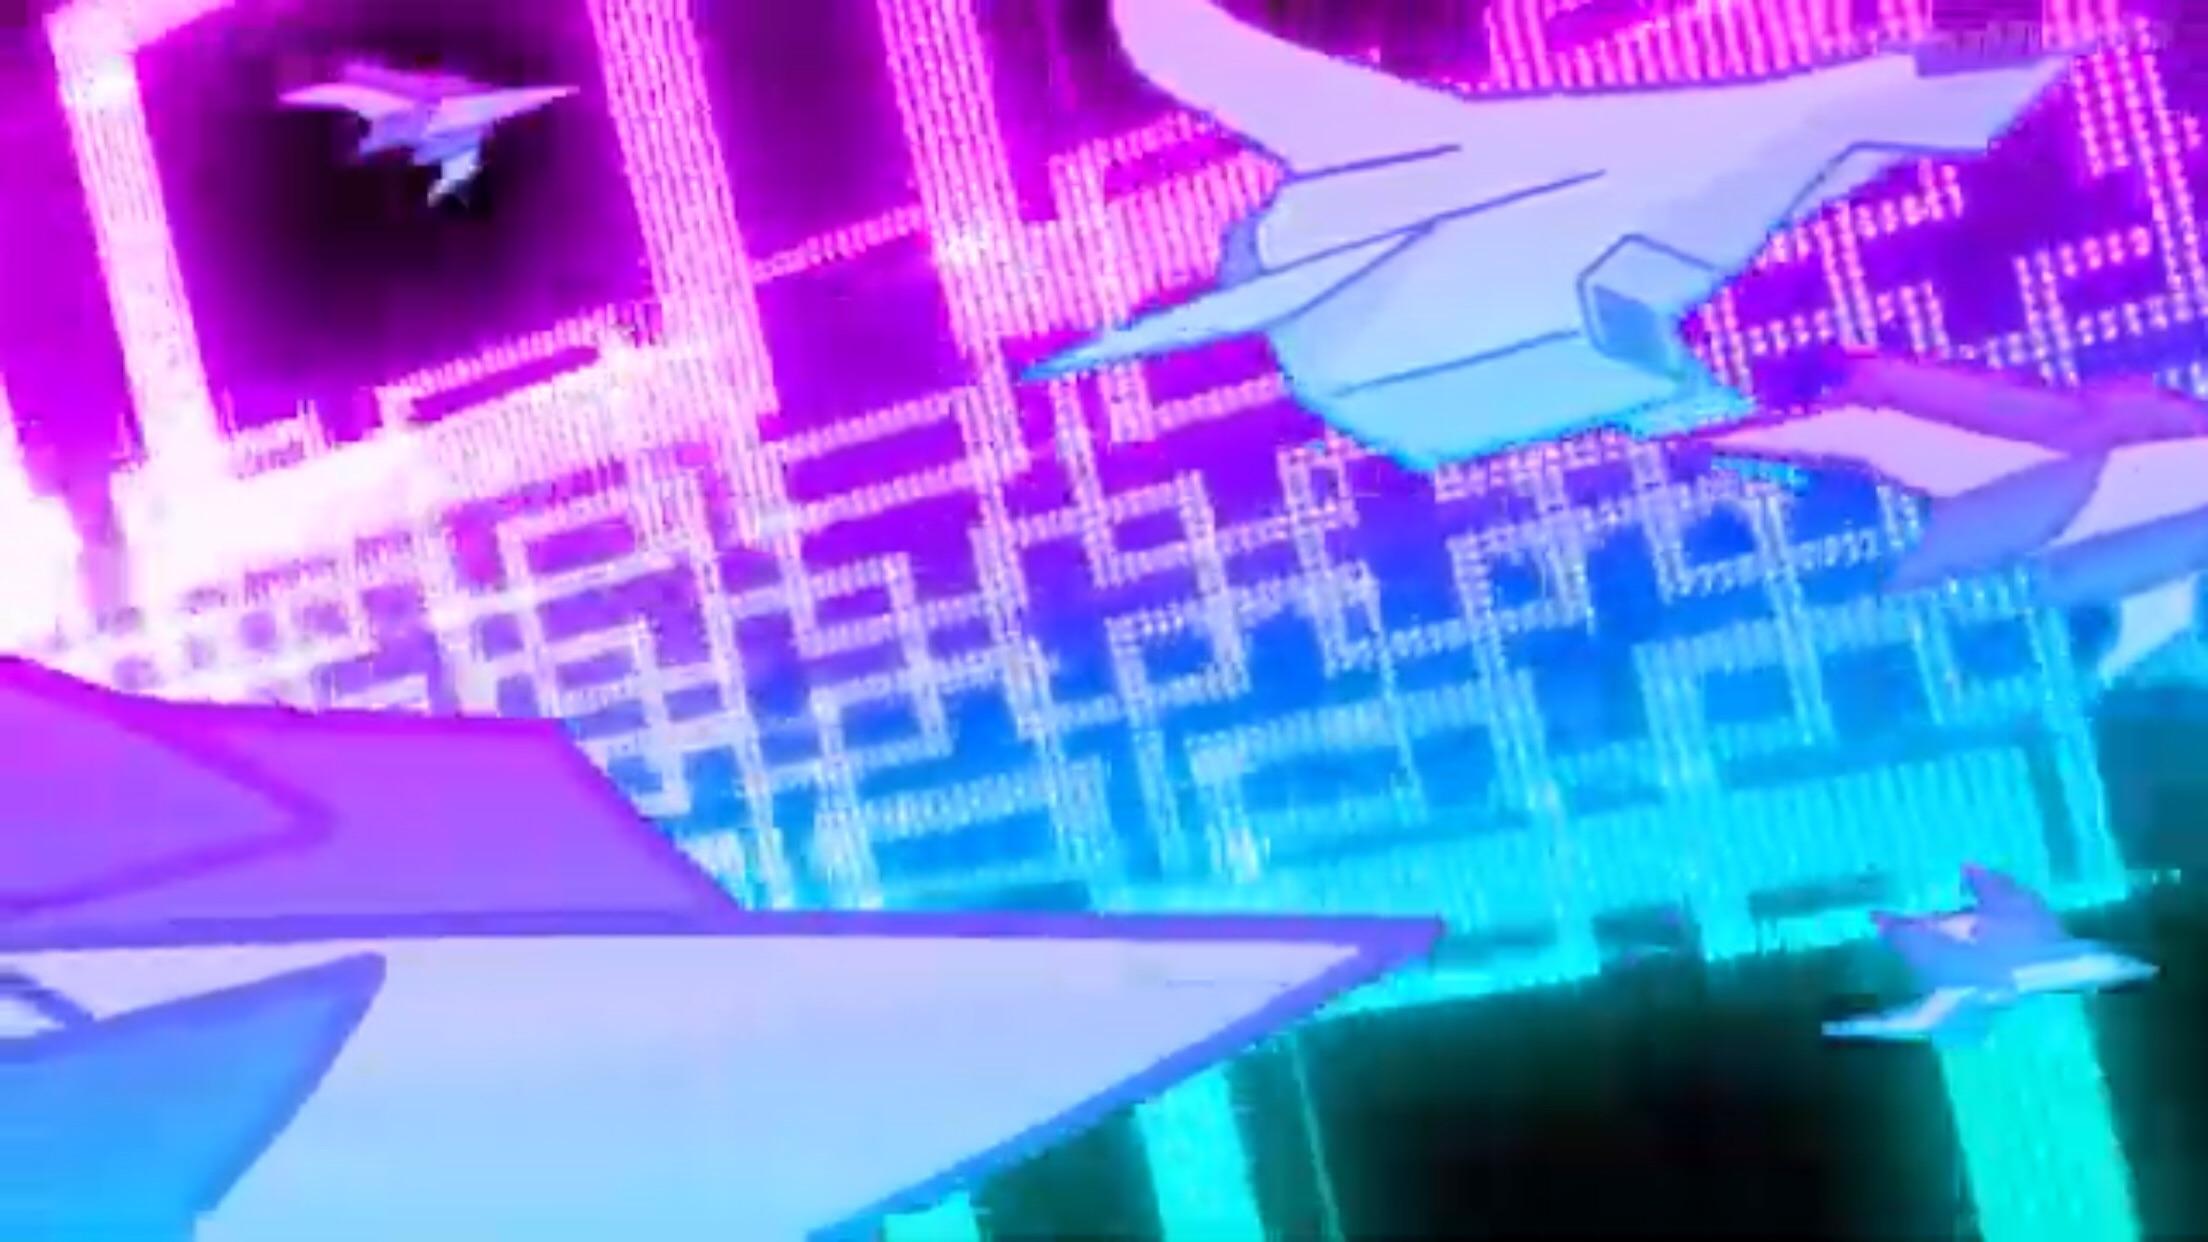 Can anyone find a 4K (3840 x 2160) screenshot of this scene in Terminal Montage's Vaporwave Dimension?